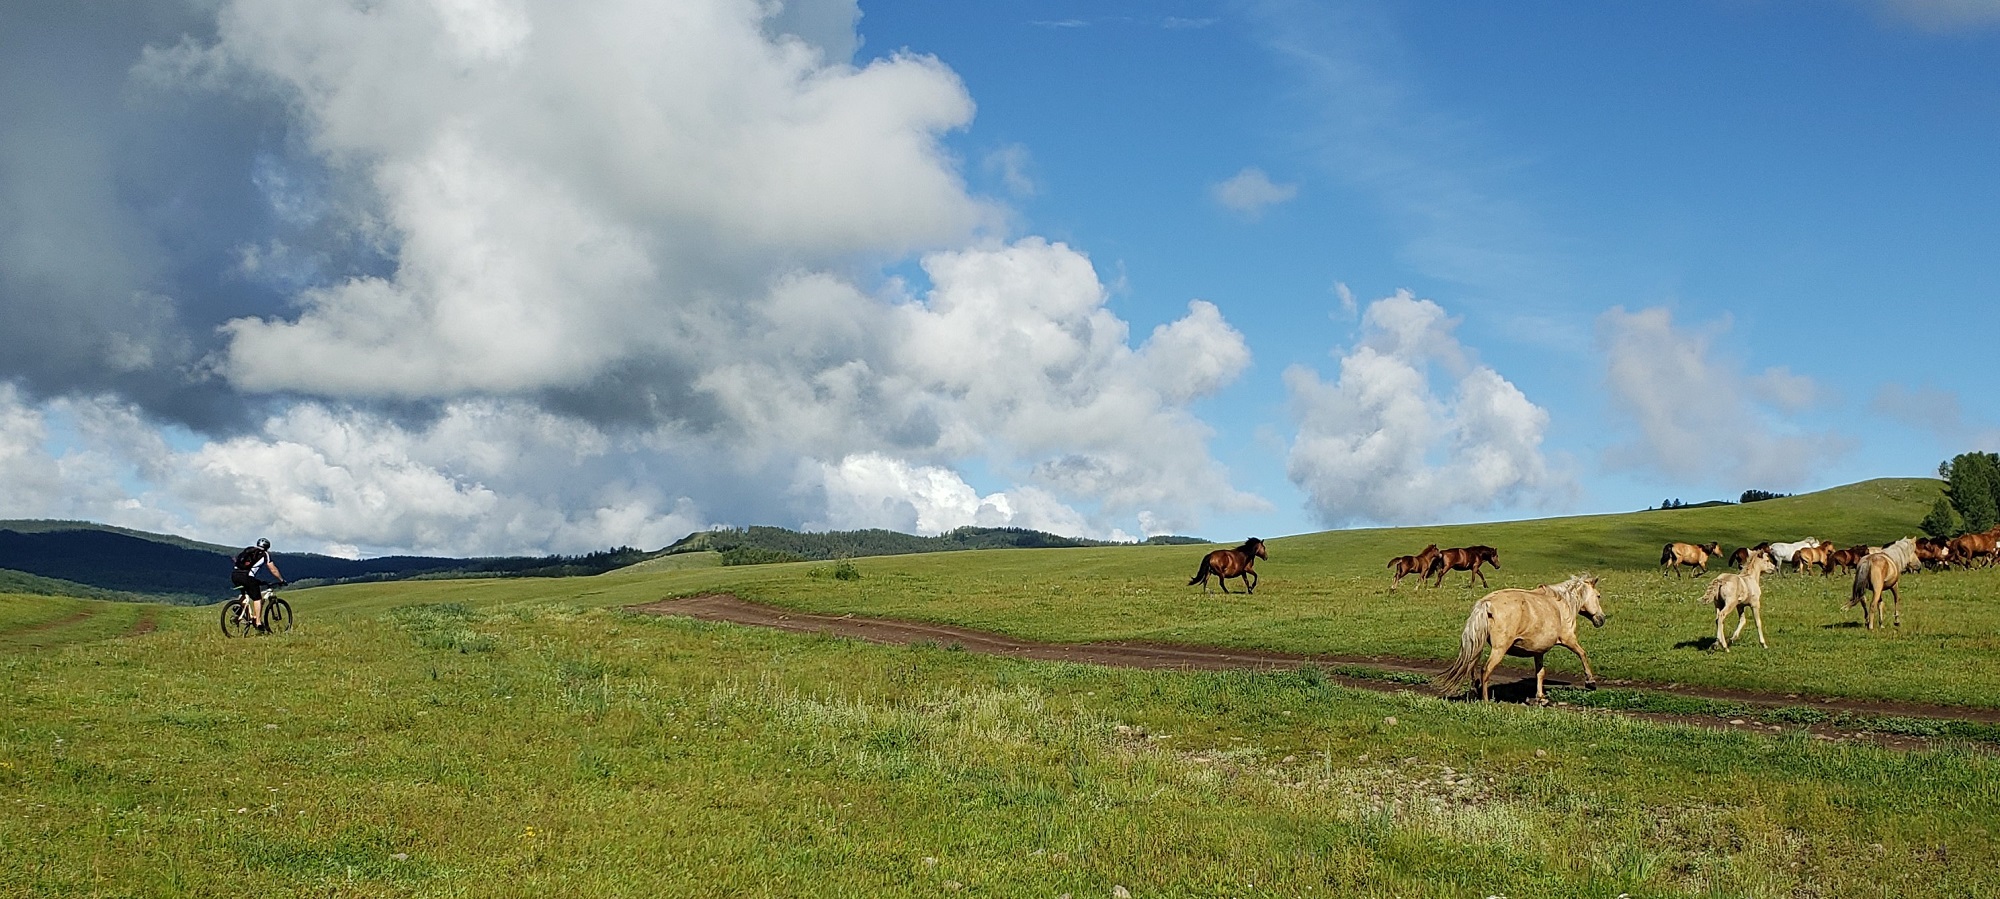 Photos from our Mongolia Bulgan Cycling Holiday